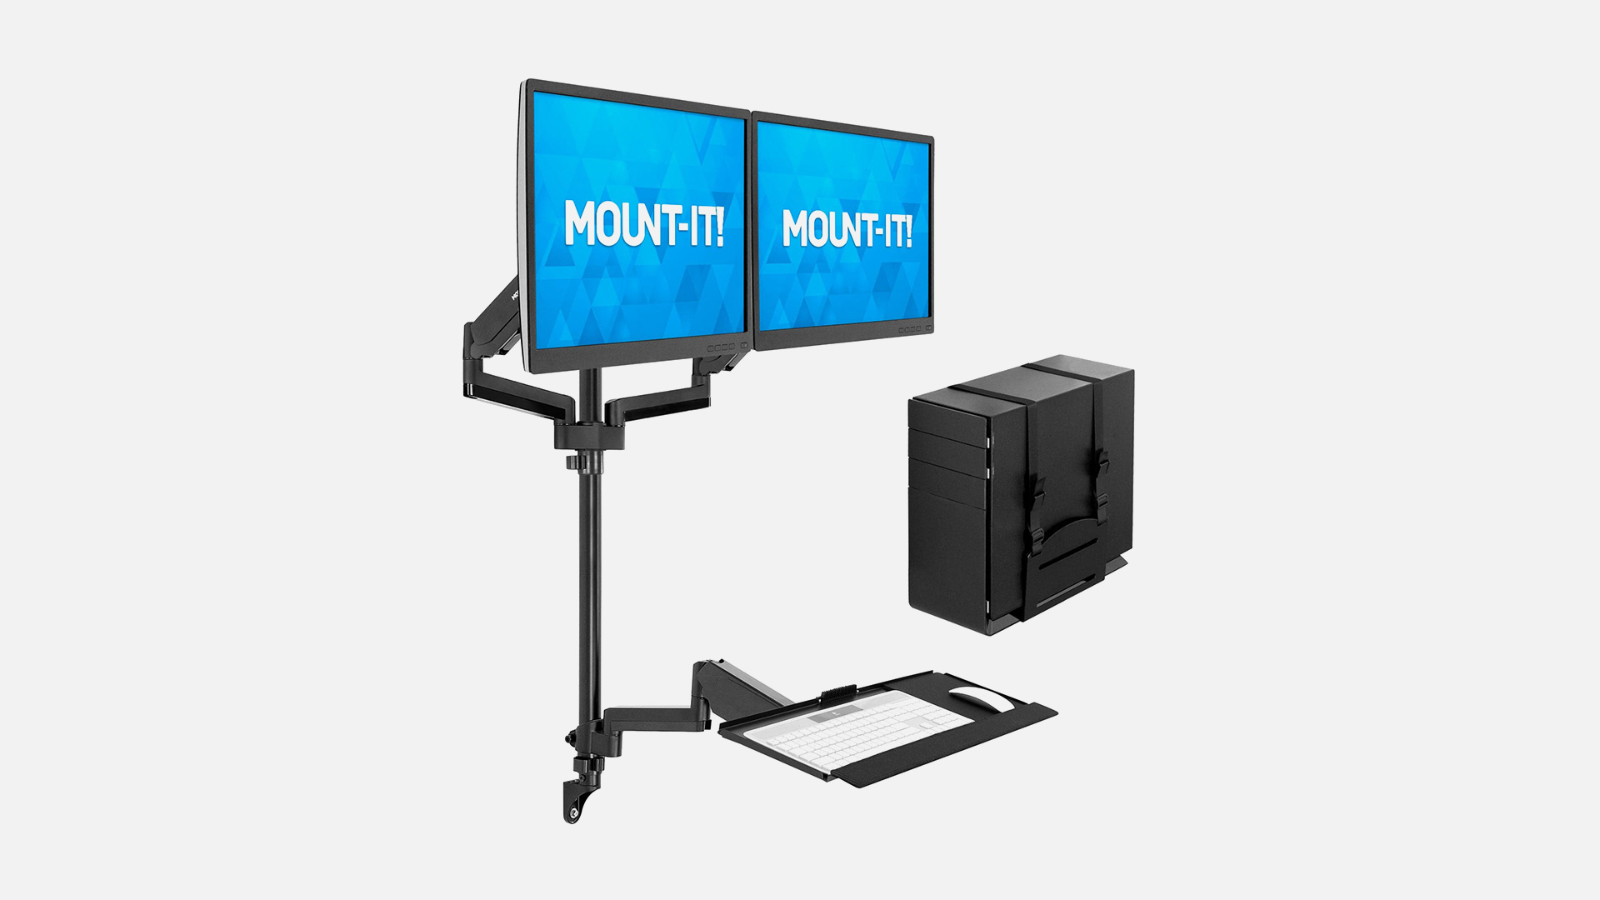 Mount-It! Dual Monitor Wall Mount Workstation